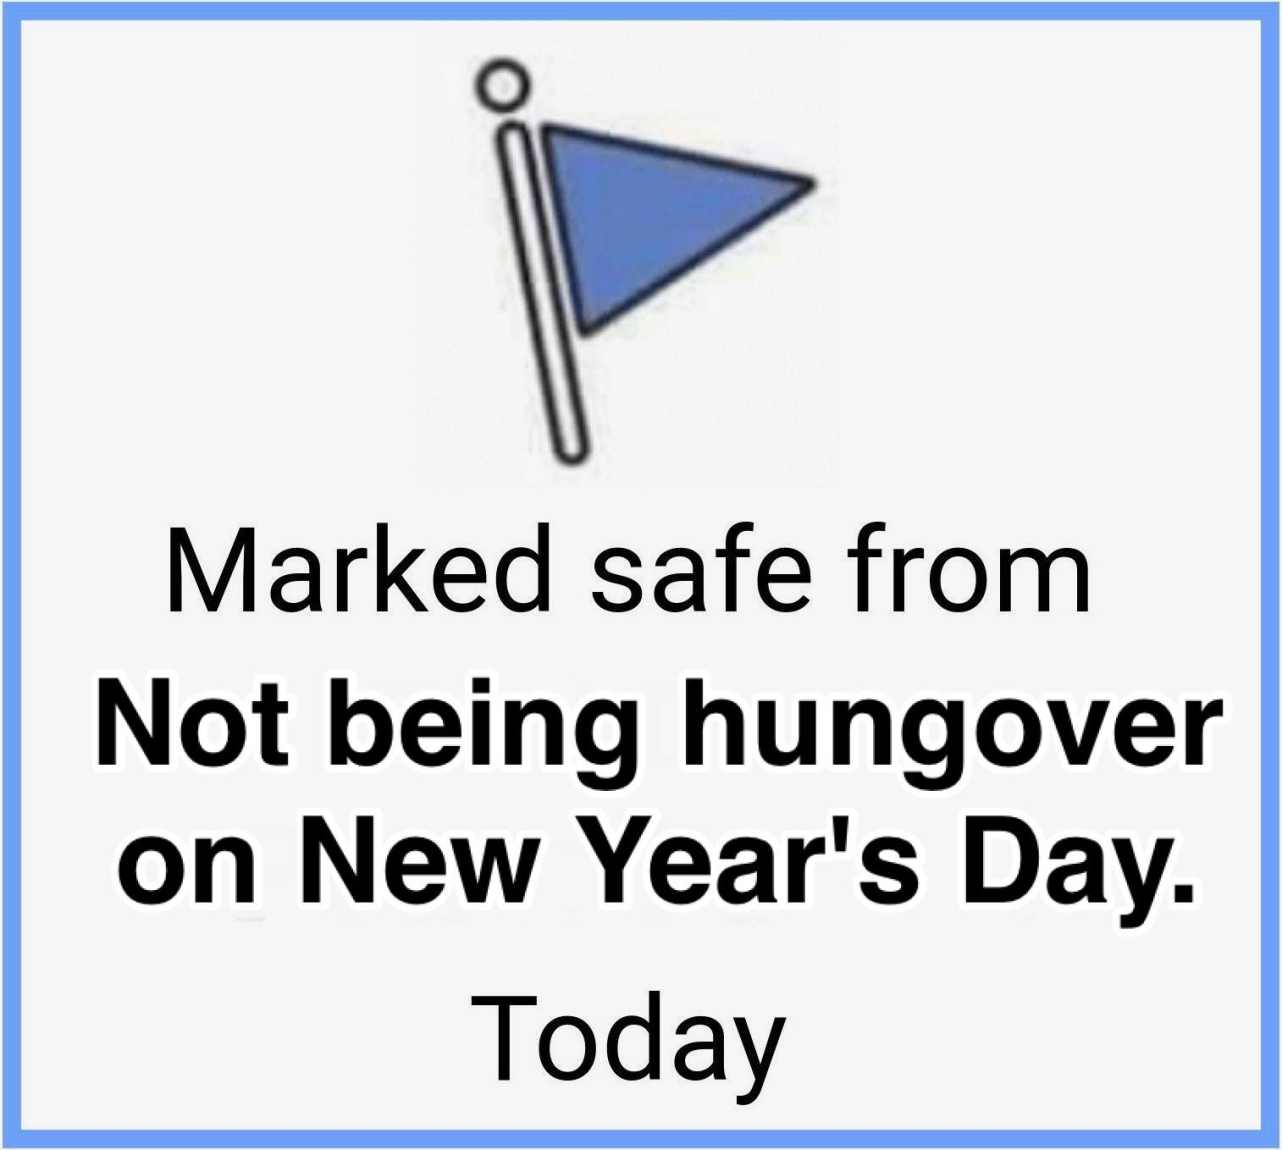 2020 Facebook marked as safe meme - triangle - Marked safe from Not being hungover on New Year's Day. Today